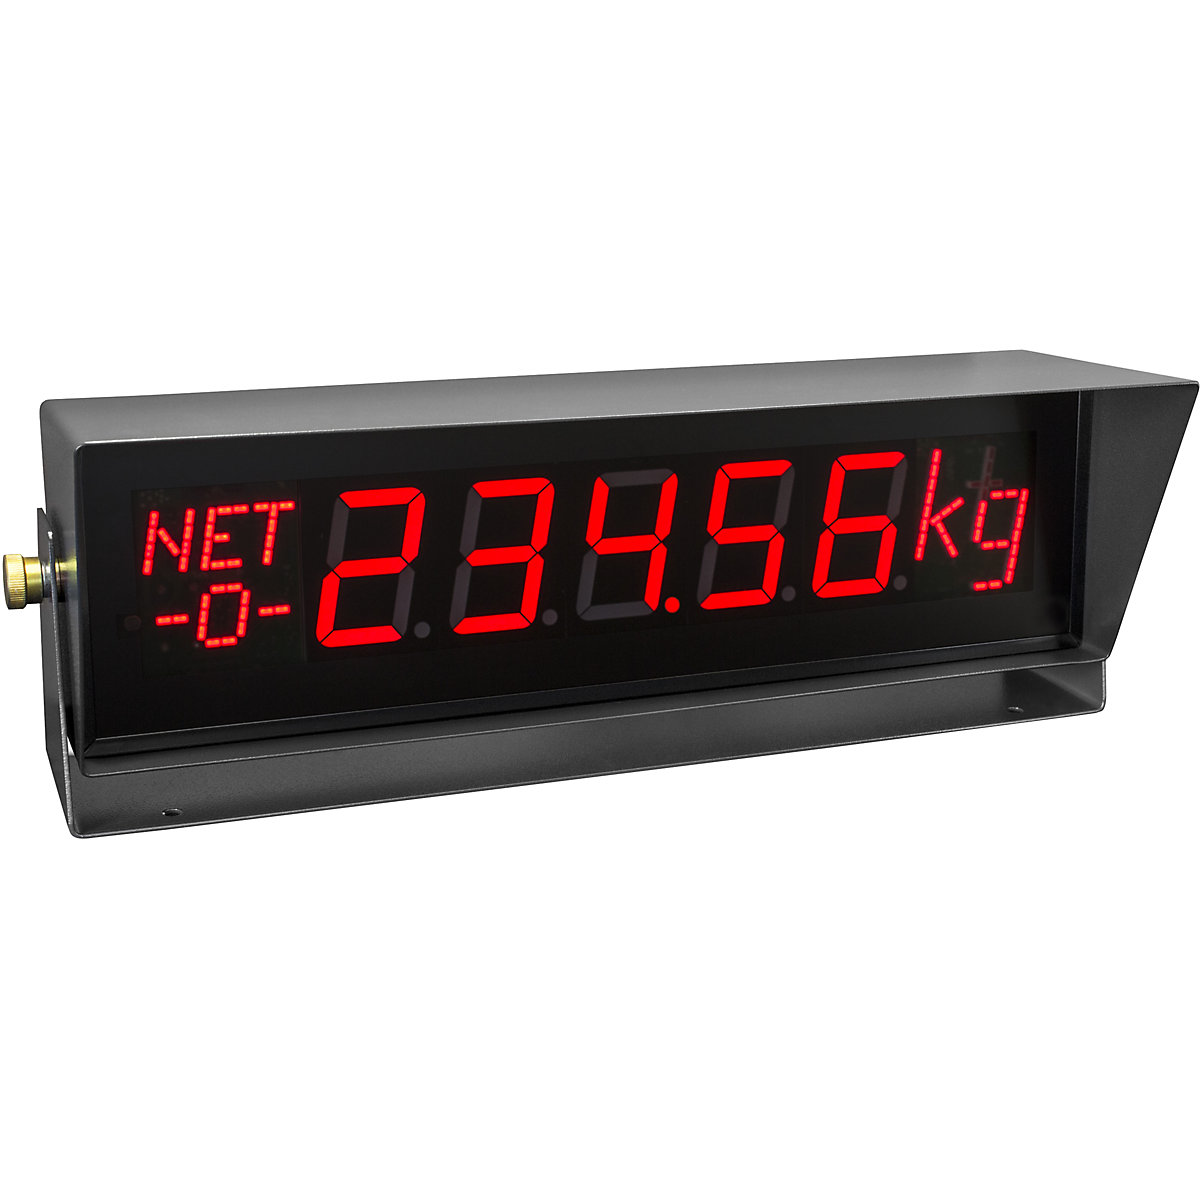 LED industrial display for scales